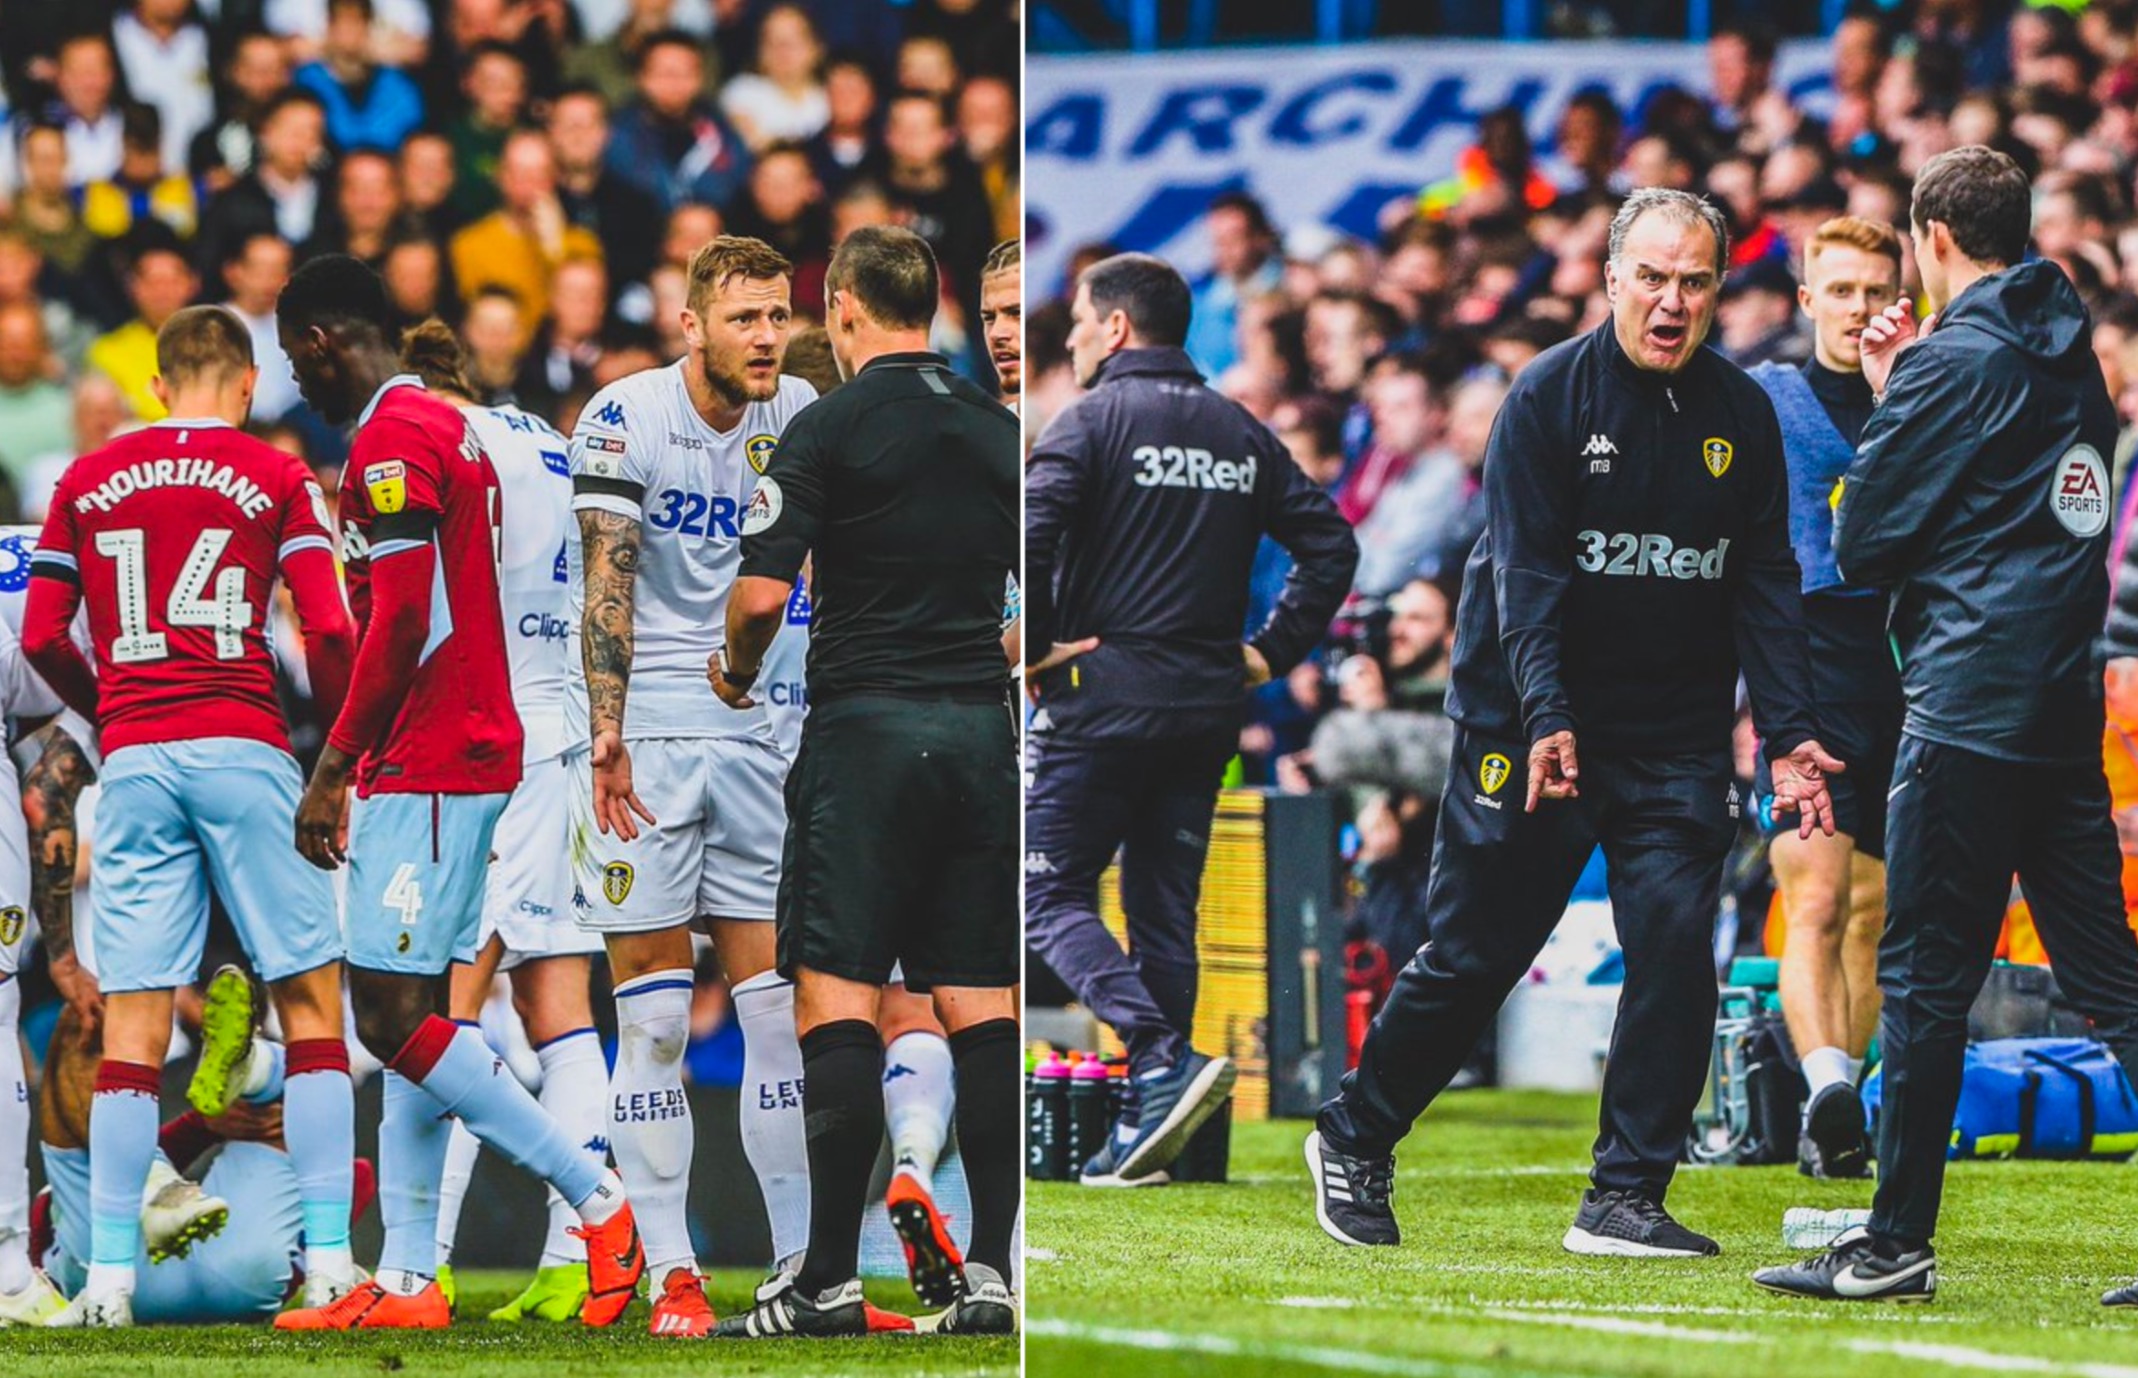 Leeds United v Aston Villa – The six minutes of complete and utter carnage at Elland Road